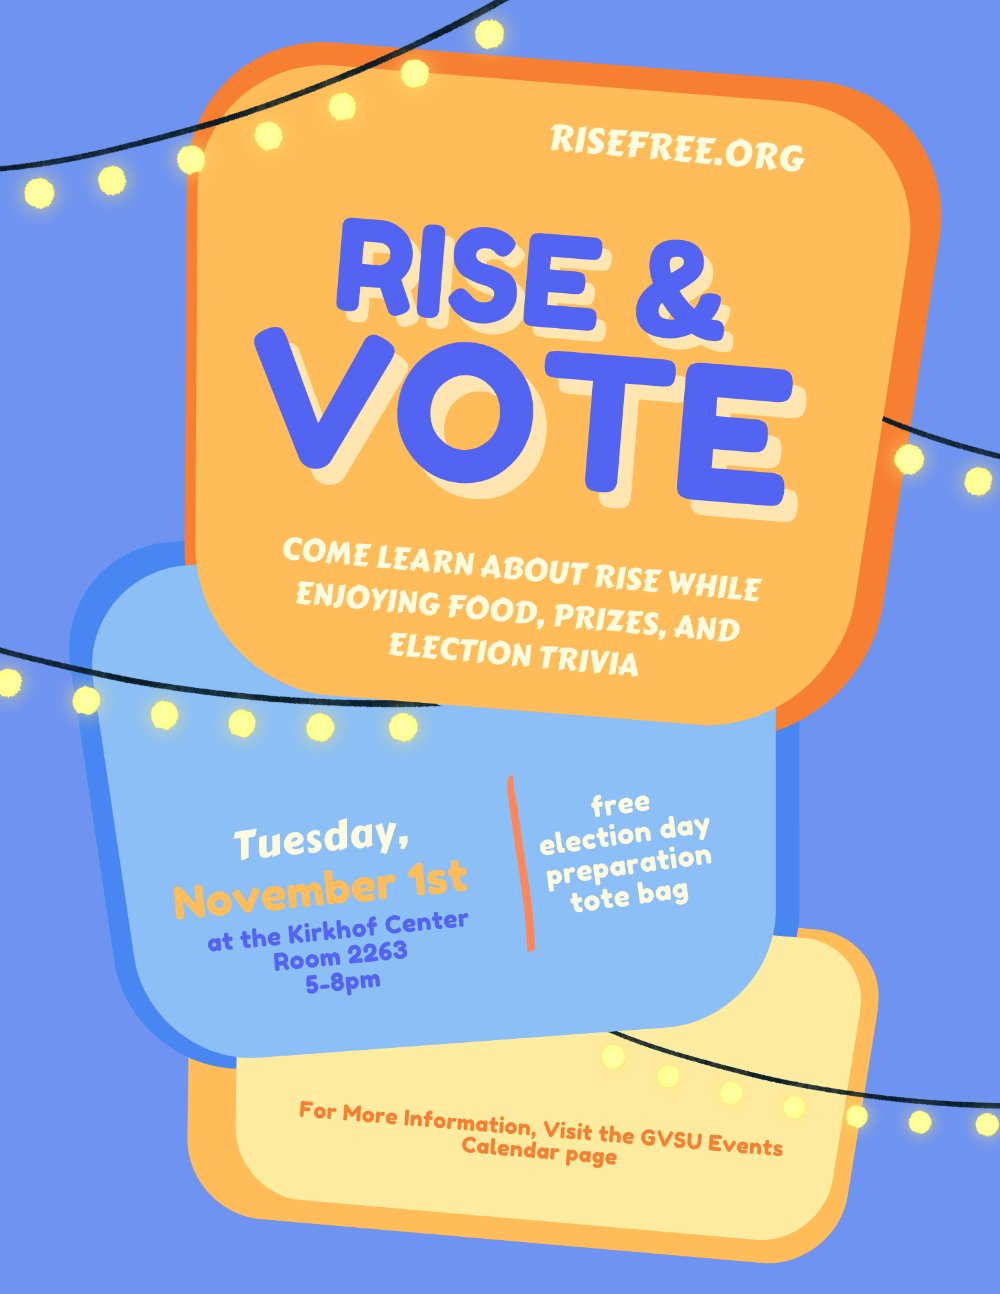 Rise & Vote event flyer